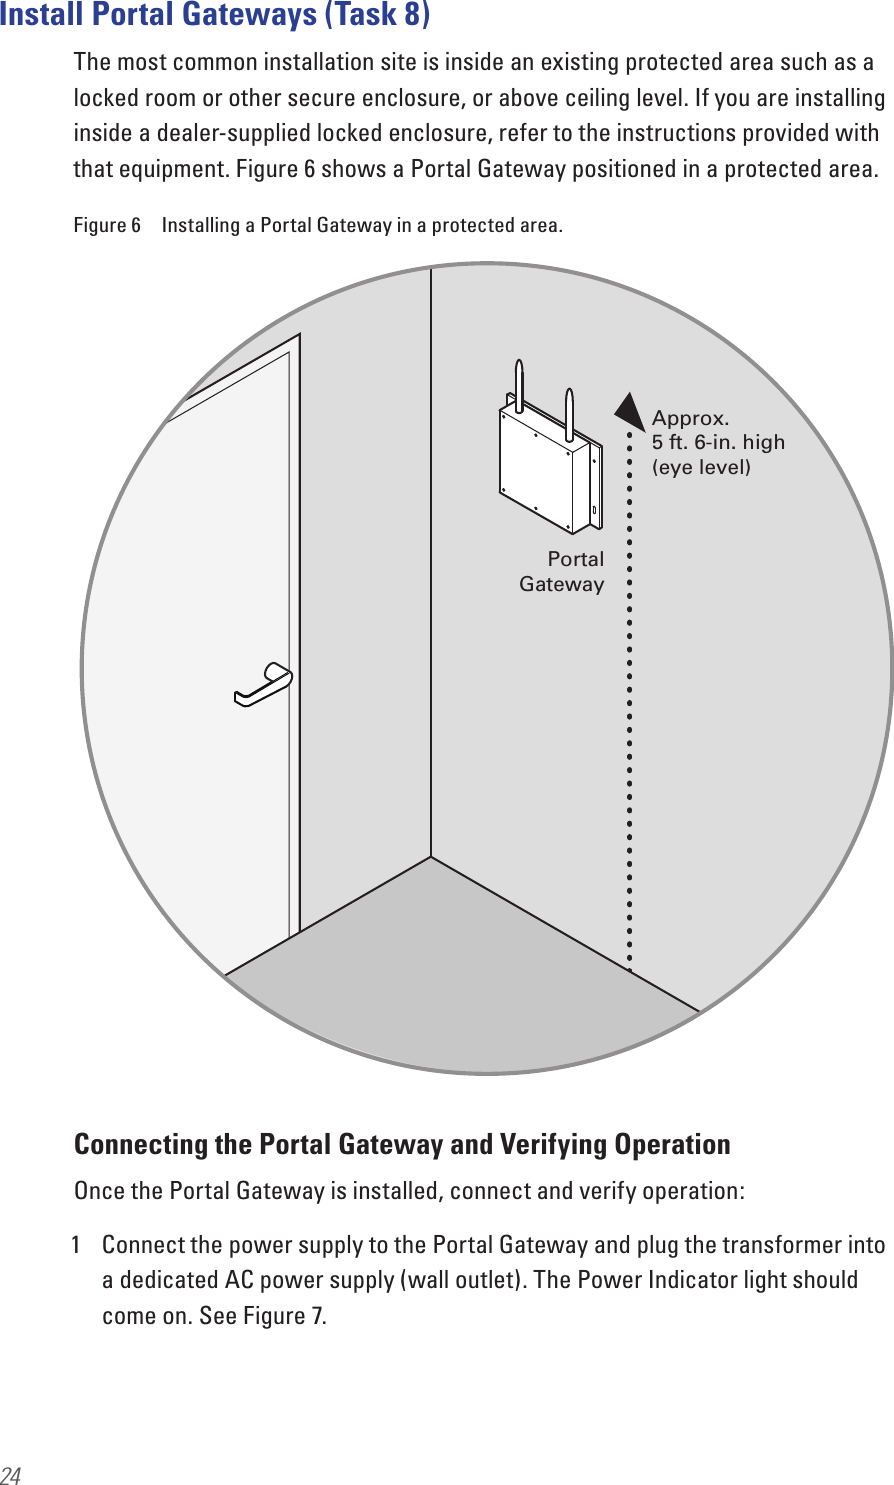 24Install Portal Gateways (Task 8)The most common installation site is inside an existing protected area such as a locked room or other secure enclosure, or above ceiling level. If you are installing inside a dealer-supplied locked enclosure, refer to the instructions provided with that equipment. Figure 6 shows a Portal Gateway positioned in a protected area.Figure 6  Installing a Portal Gateway in a protected area.Connecting the Portal Gateway and Verifying OperationOnce the Portal Gateway is installed, connect and verify operation:1  Connect the power supply to the Portal Gateway and plug the transformer into a dedicated AC power supply (wall outlet). The Power Indicator light should come on. See Figure 7.Approx. 5 ft. 6-in. high(eye level)PortalGateway